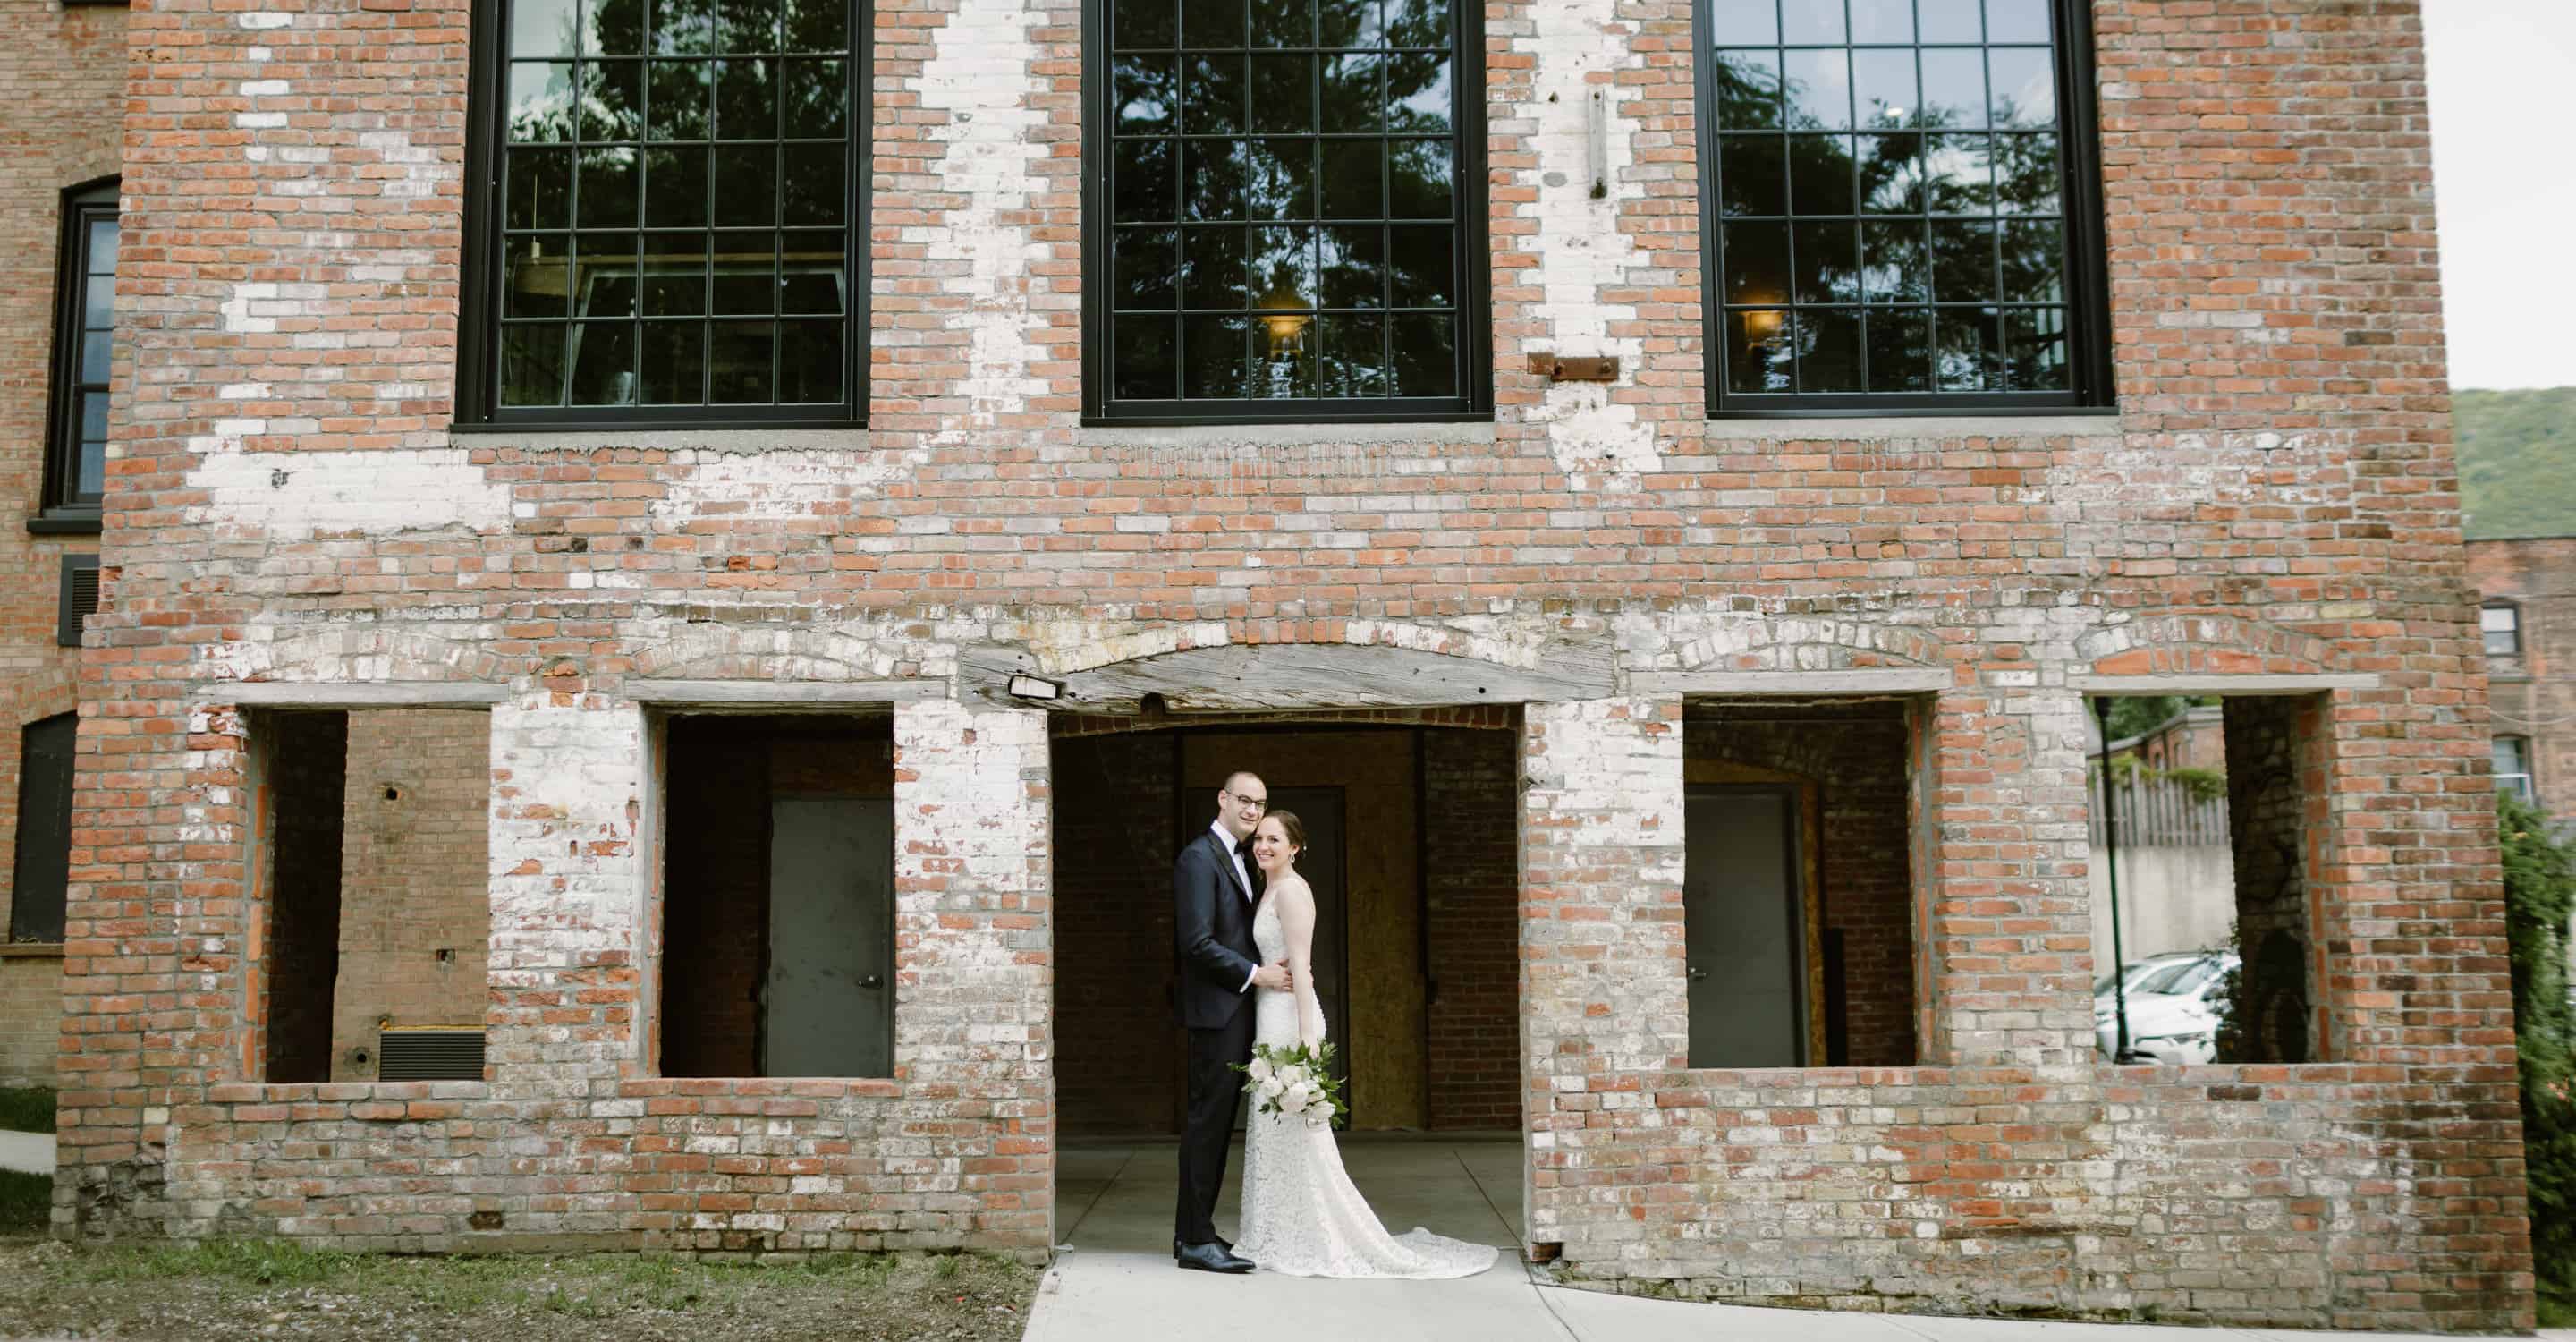 The Roundhouse House Wedding